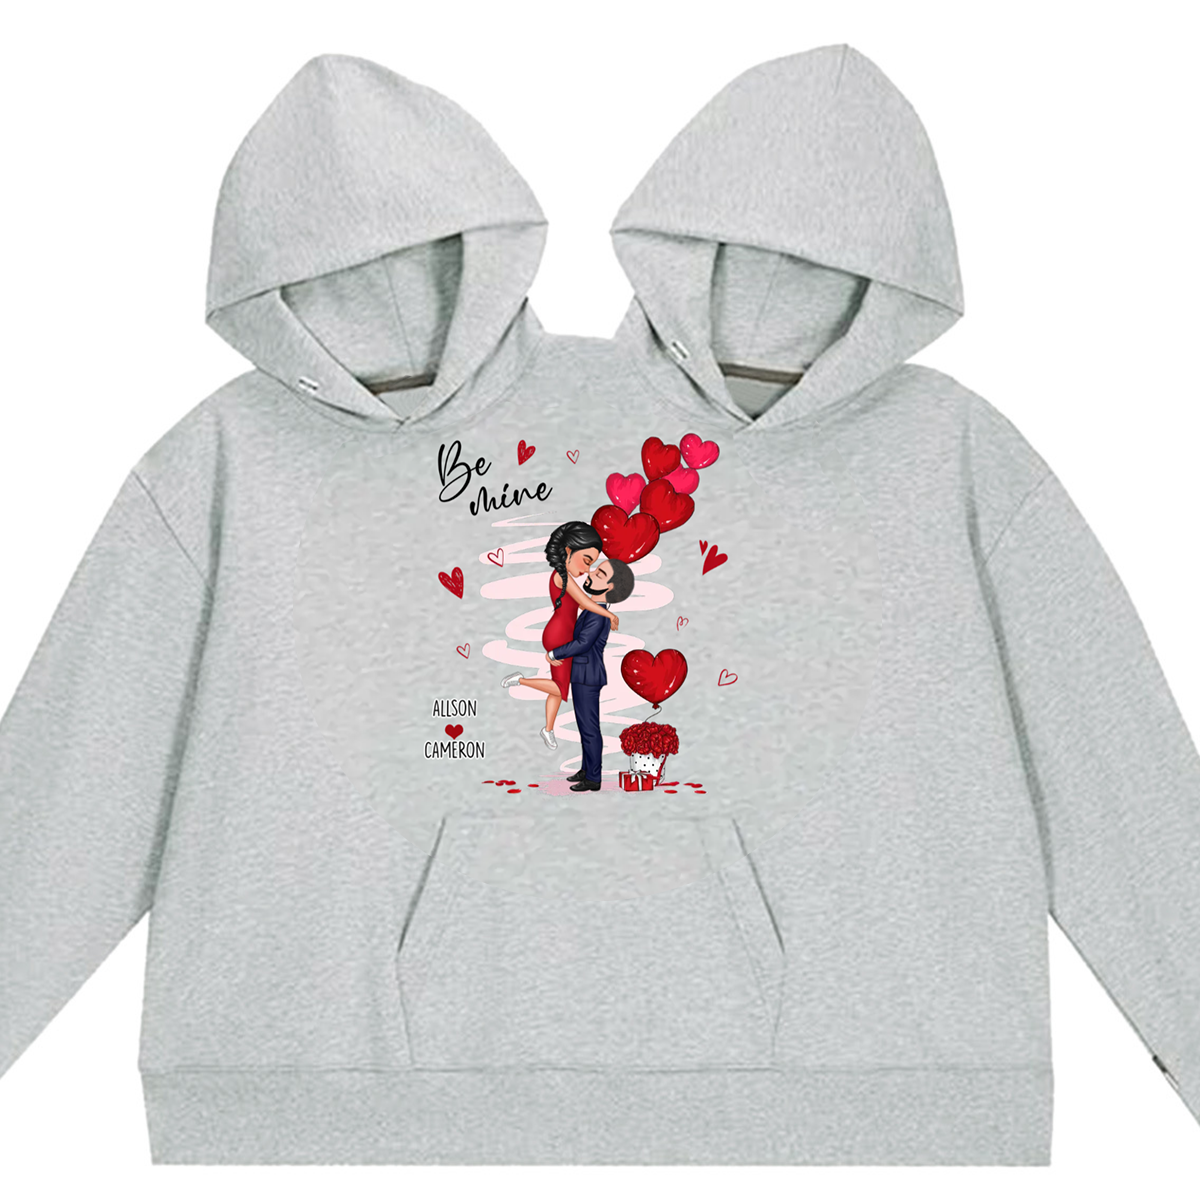 Be Mine Doll Couple Hugging Kissing Personalized Couple One-Piece Hoodie Sweatshirt